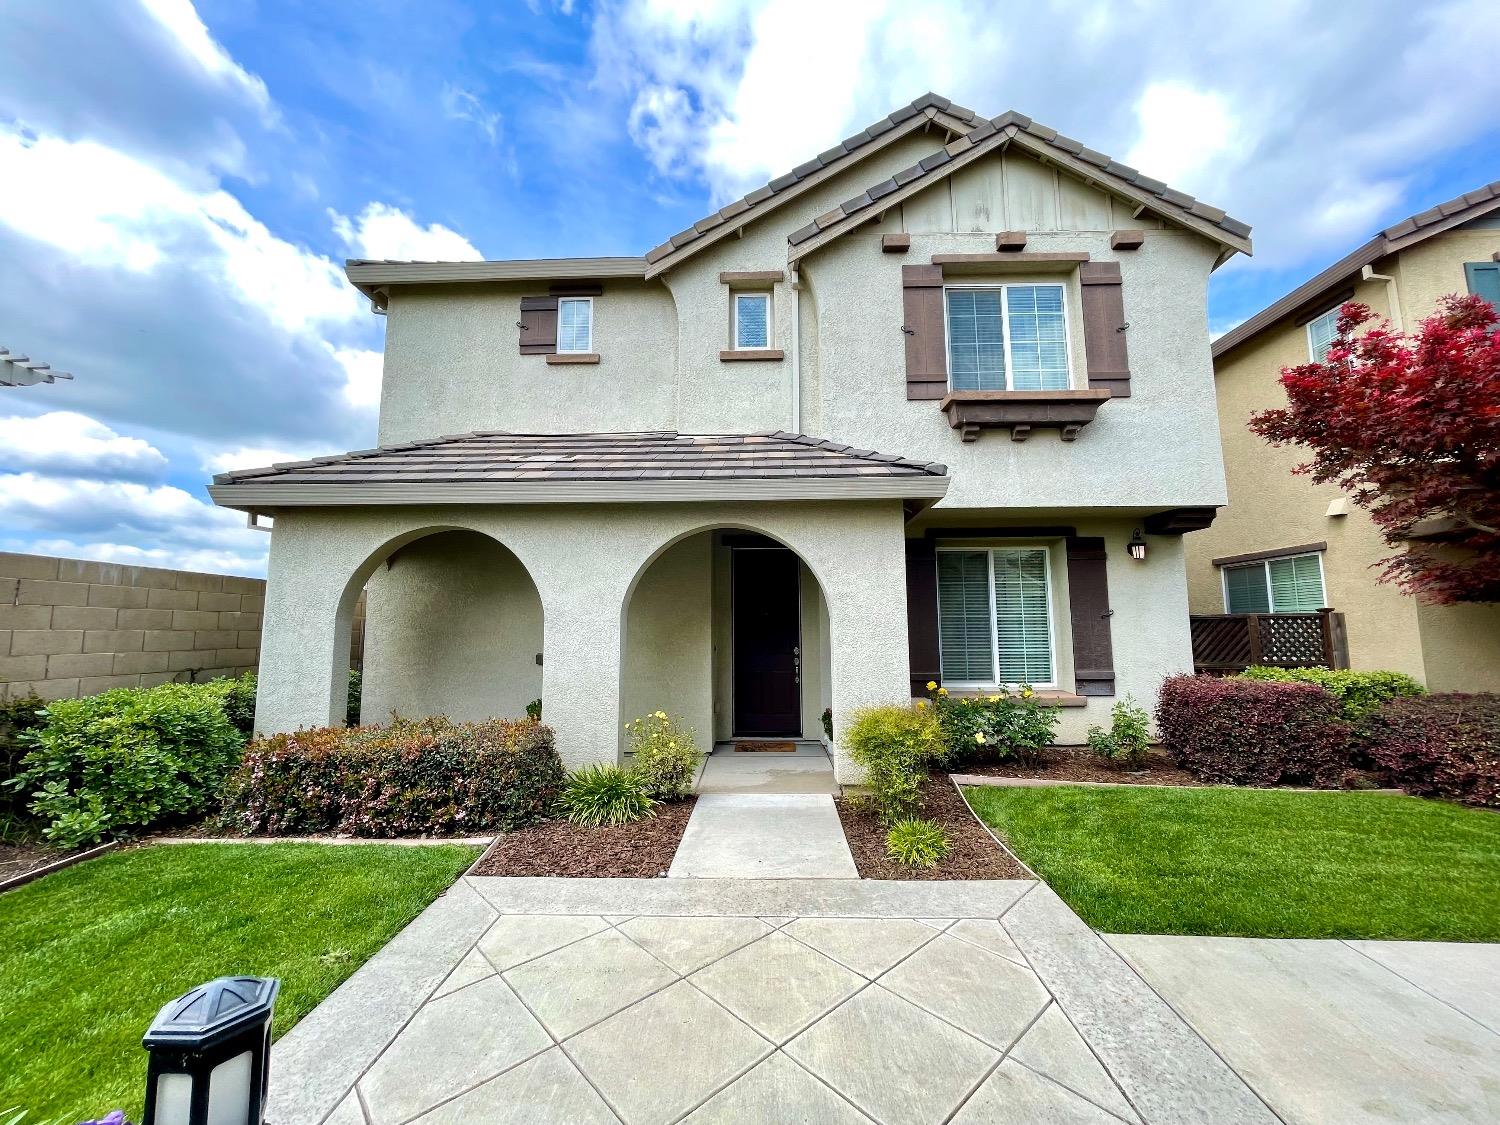 Photo of 364 Carriage Ln in Oakdale, CA